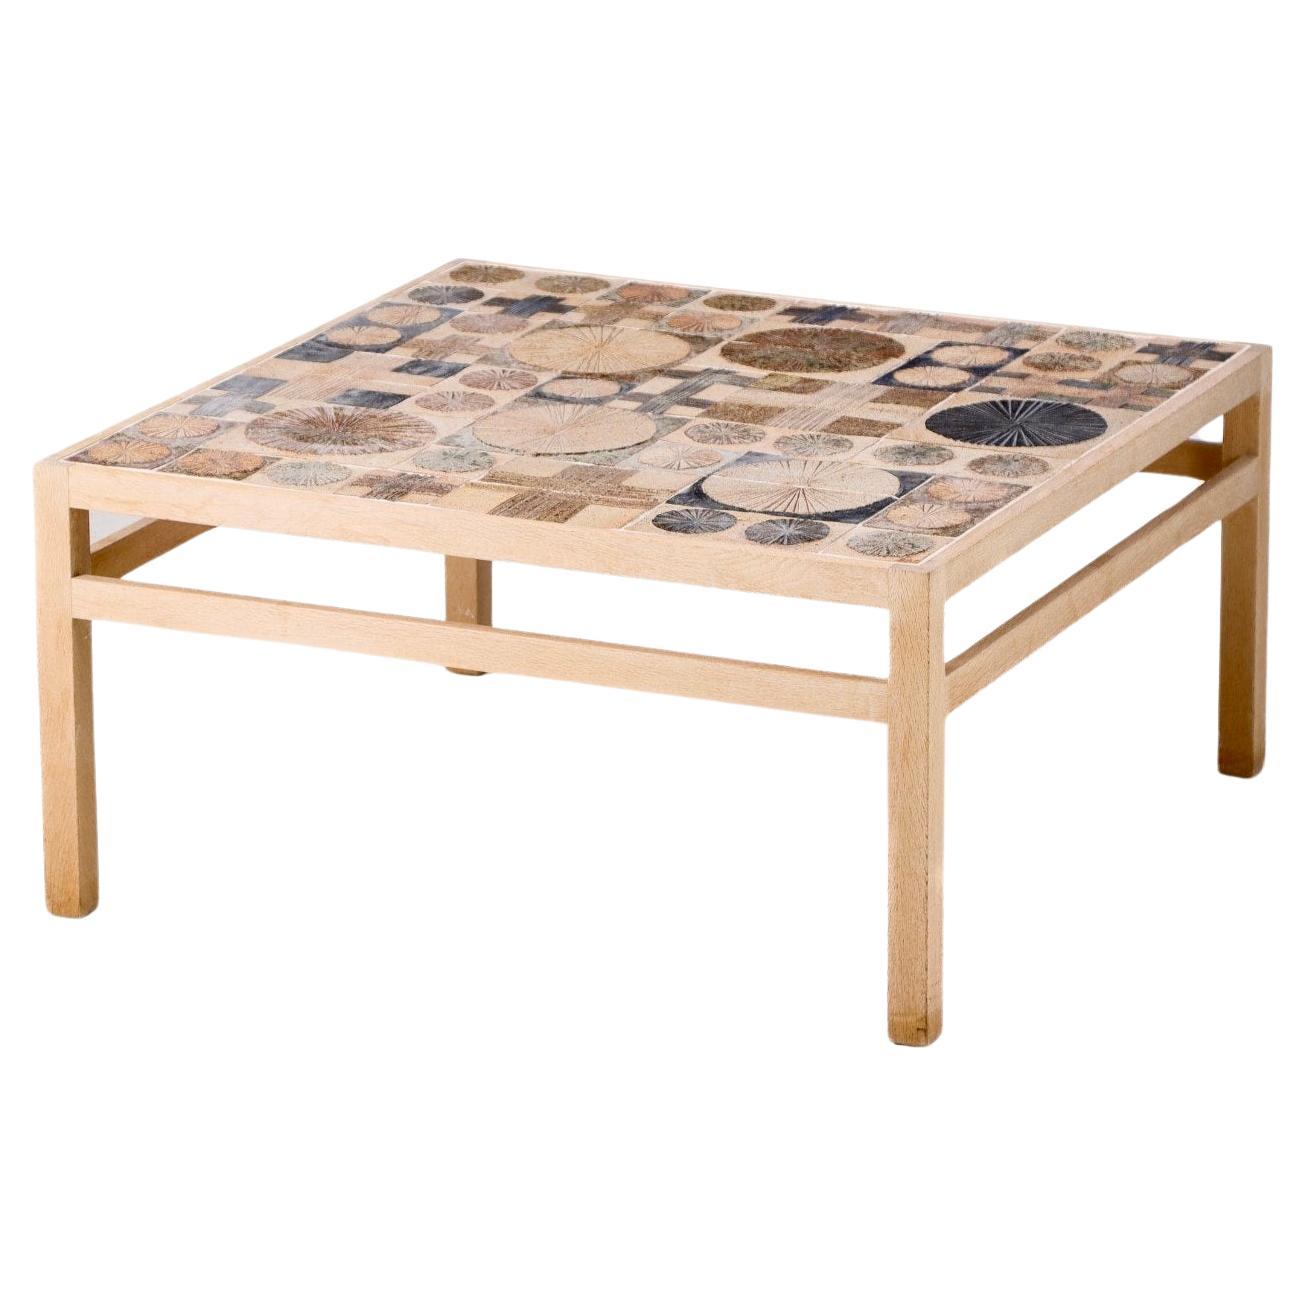 Exquisite large oak coffee table of hand painted tiles by Tue Poulsen (Denmark 1939 - Danish sculptor, artist, designer and ceramist) executed by Master carpenter Willy Beck. 
Table is signed with paper label reading 'Snedkermester Willy Beck